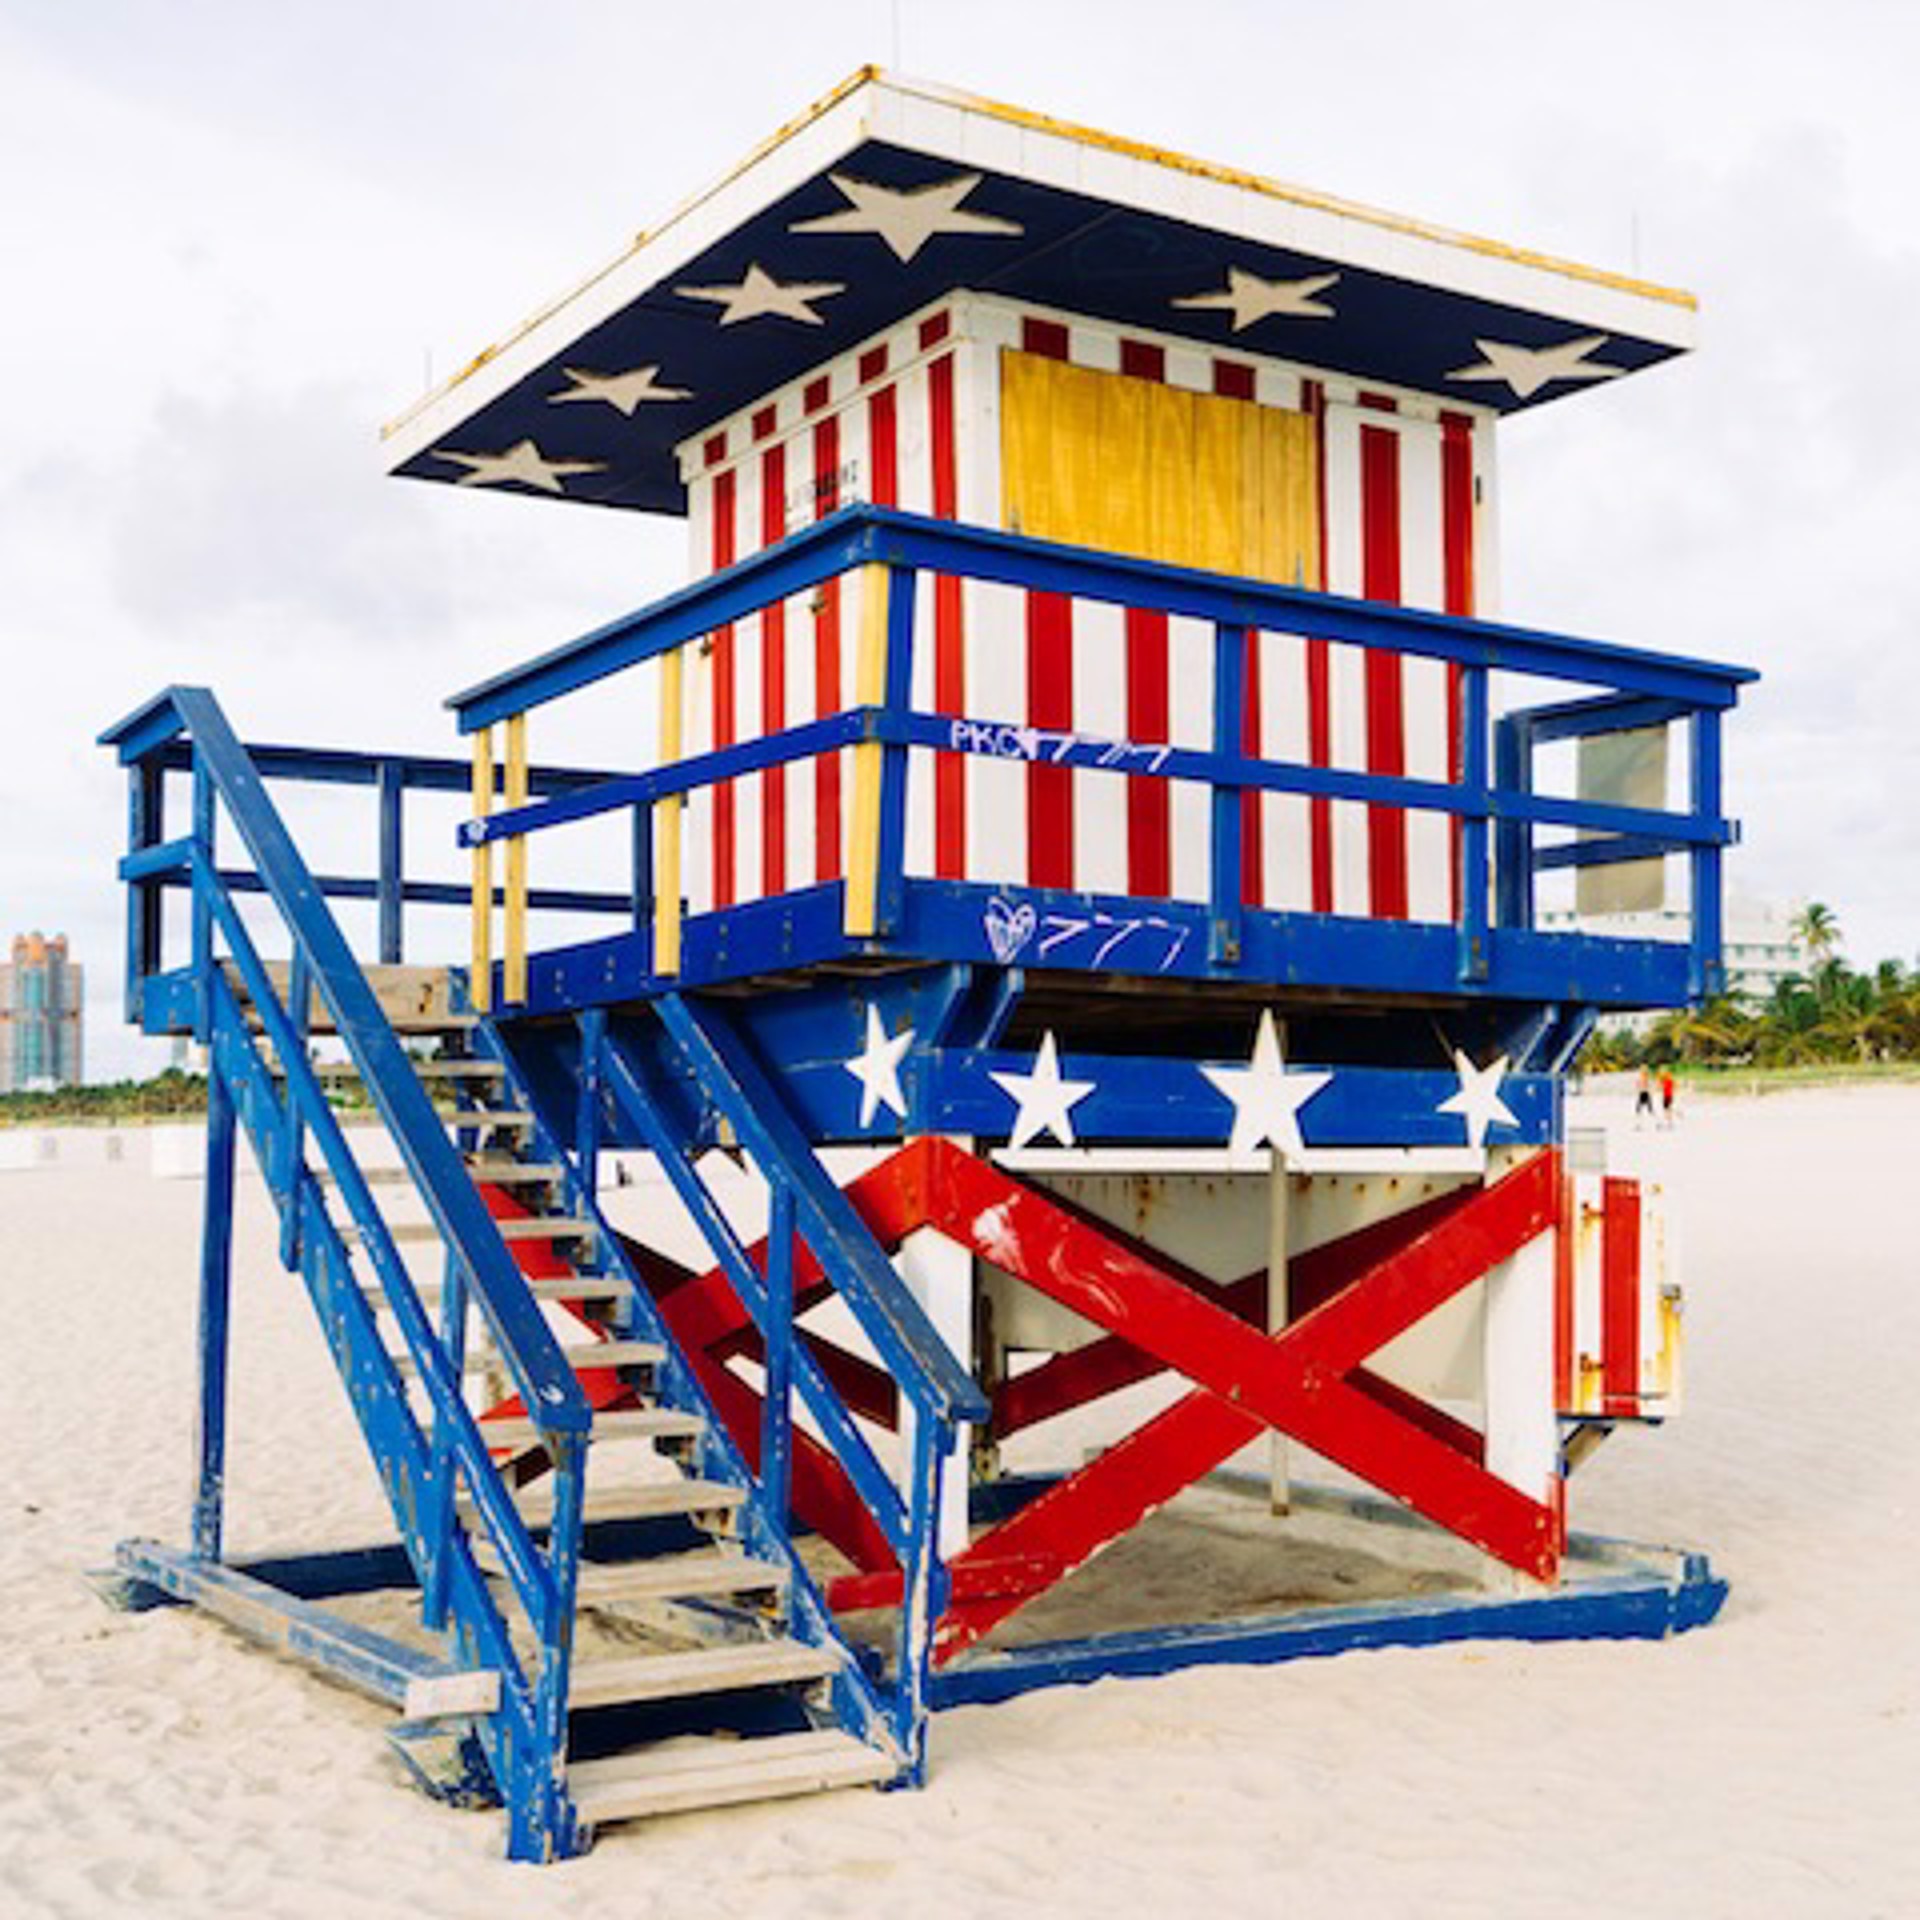 Stars and Stripes Lifeguard Stand by Peter Mendelson